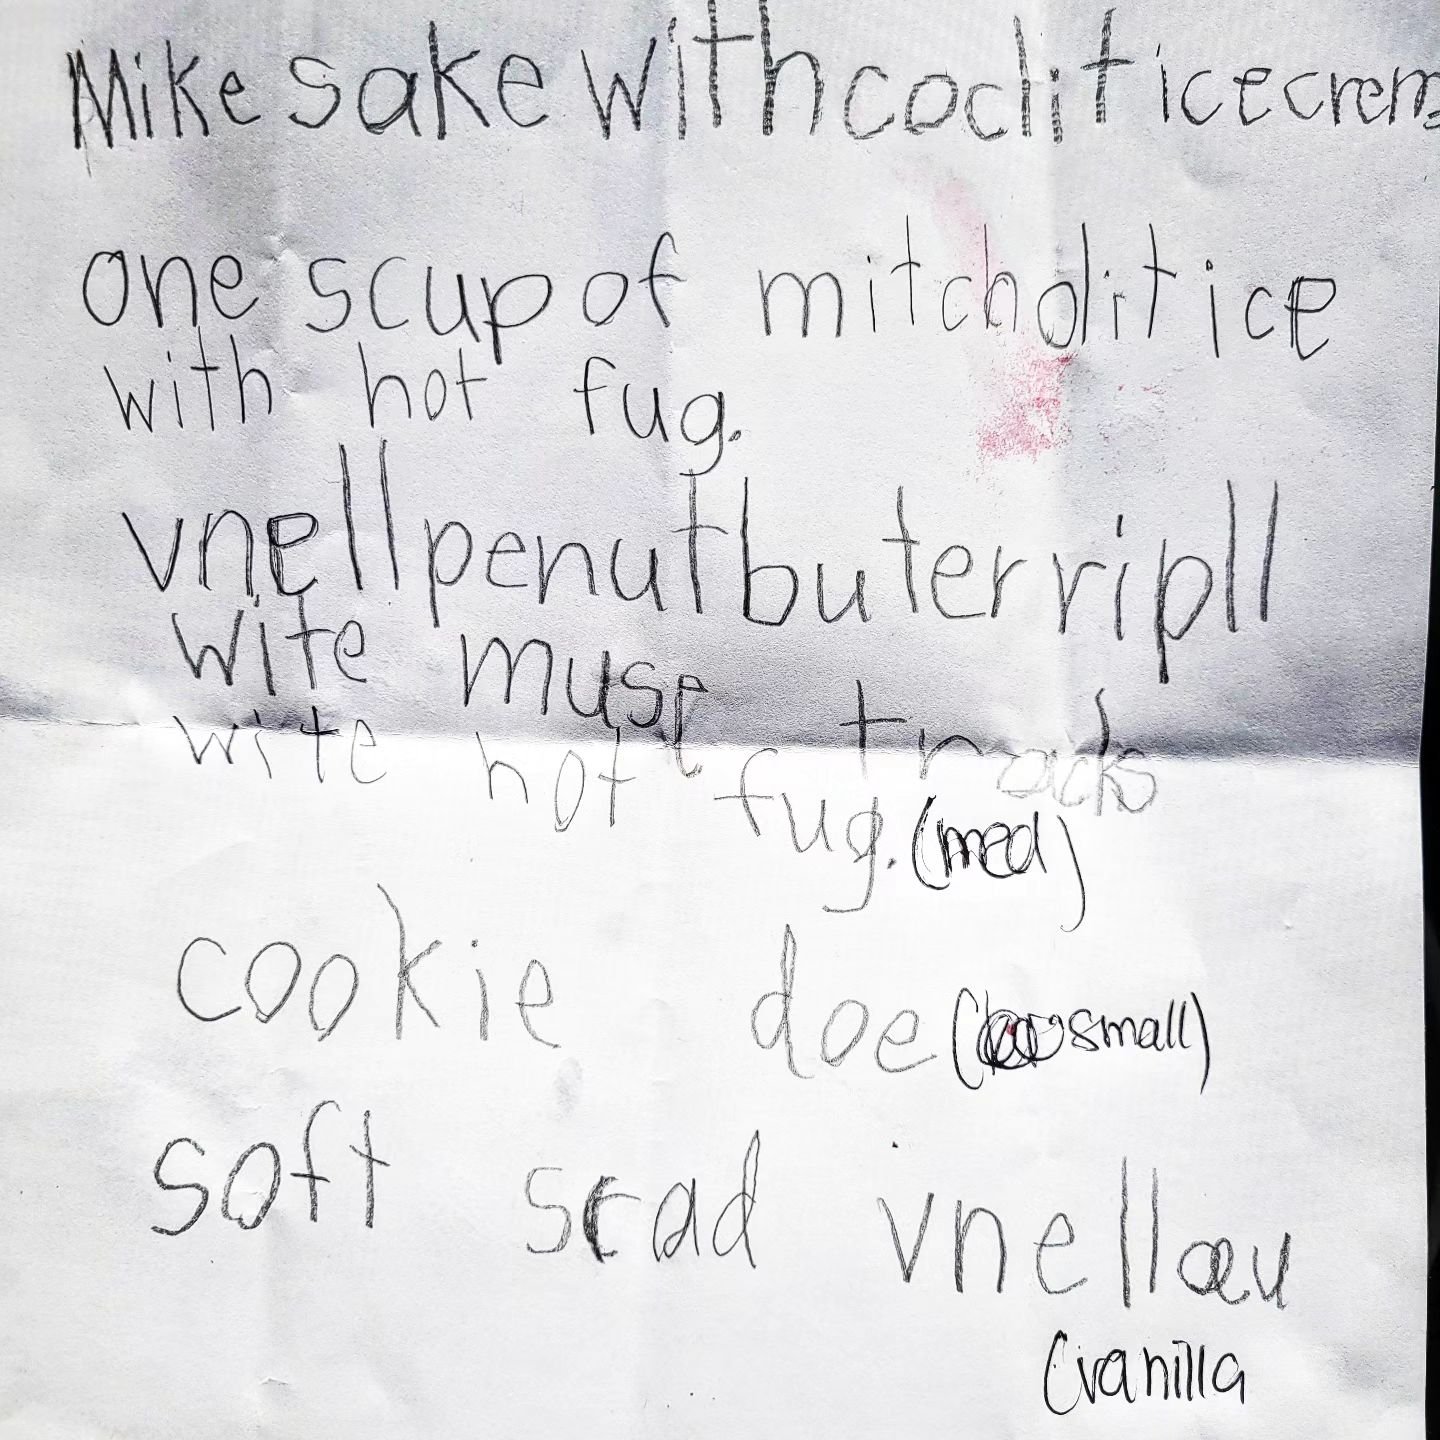 List is Ready for Saturday night #icecream  dessert for mom &amp; the fam @mickeys_ice_cream

Open 1-9pm Daily